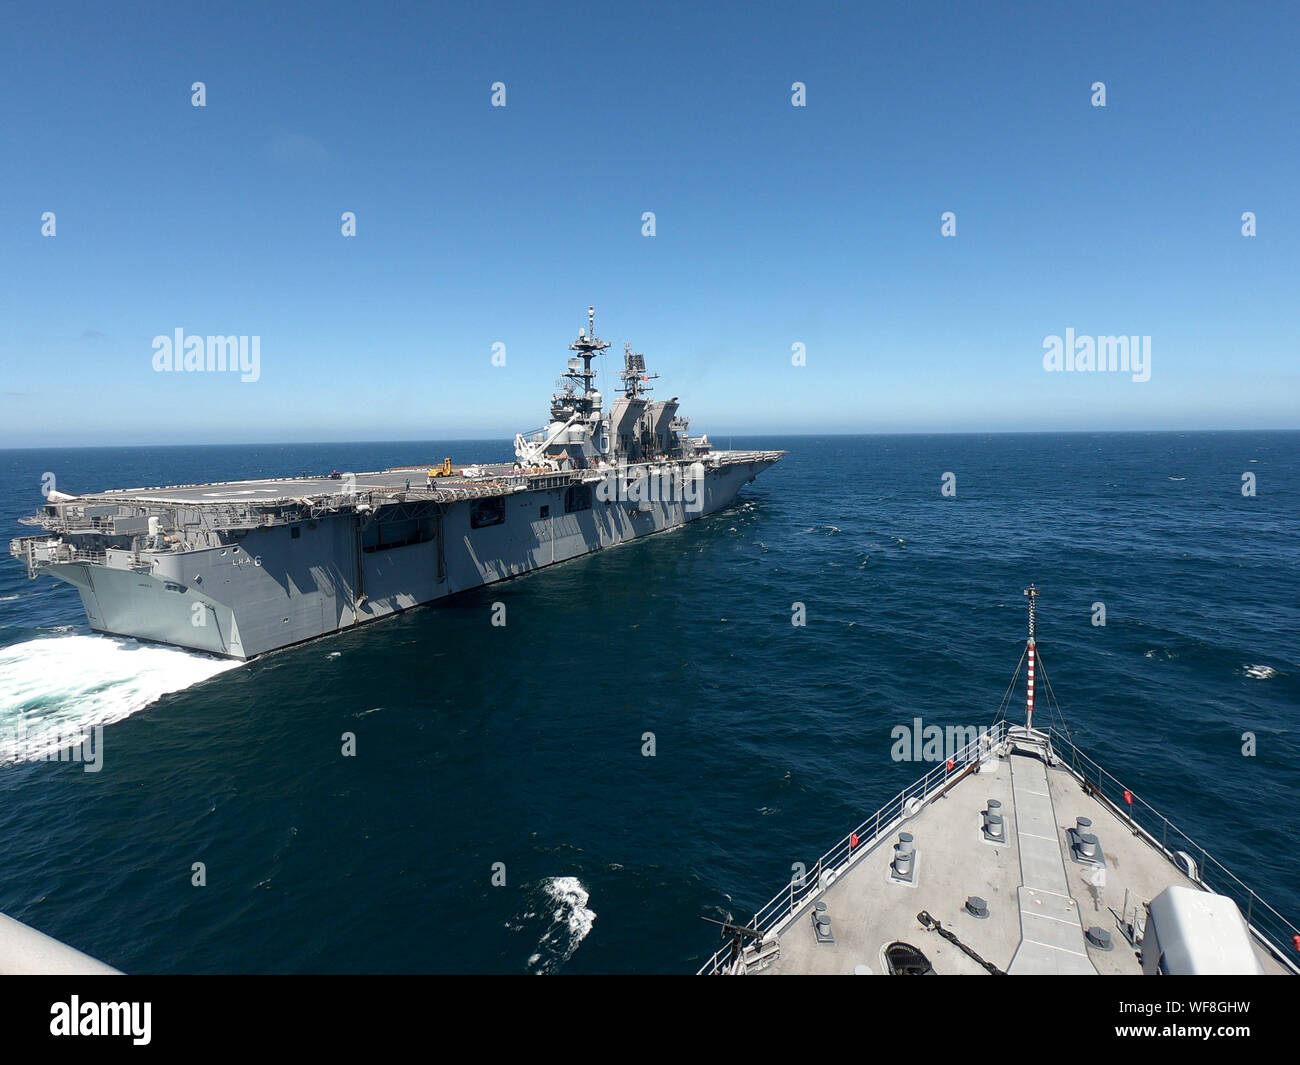 190820-N-XN177-0205 PACIFIC OCEAN (Aug. 20, 2019) –The dock landing ship USS Comstock (LSD 45) prepares to come along side amphibious assault ship USS America (LHA 6) during a replenishment at sea evolution. Comstock is currently underway conducting routine operations. This year USS Comstock will participate in the U.S. Navy Fleet Week in Los Angeles. (U.S. Navy Photo by Mass Communication Specialist 1st Class Peter Burghart/Released) Stock Photo